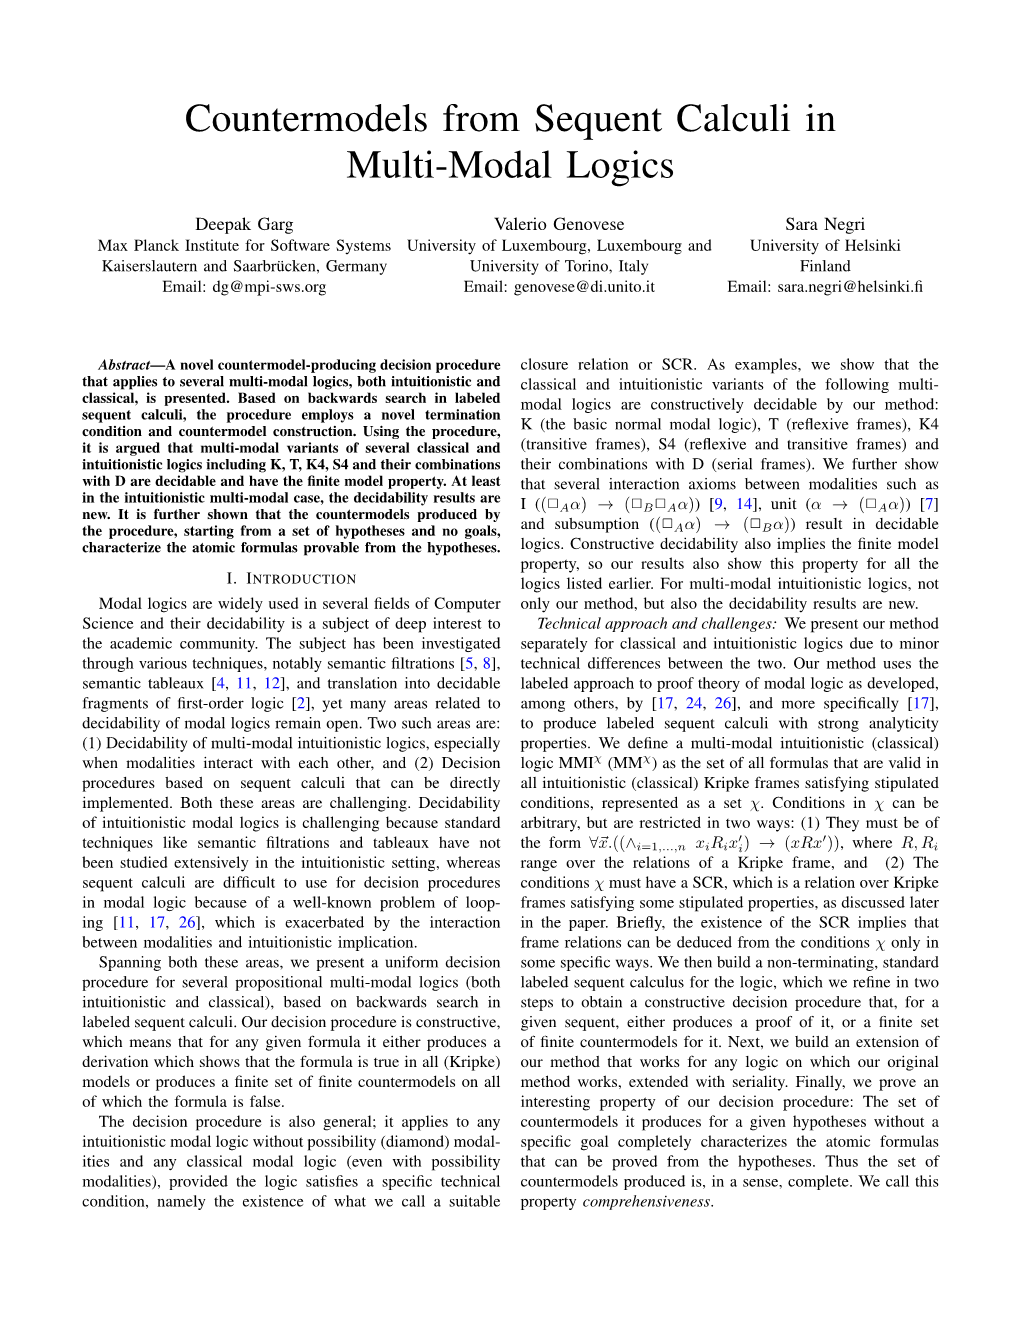 Countermodels from Sequent Calculi in Multi-Modal Logics